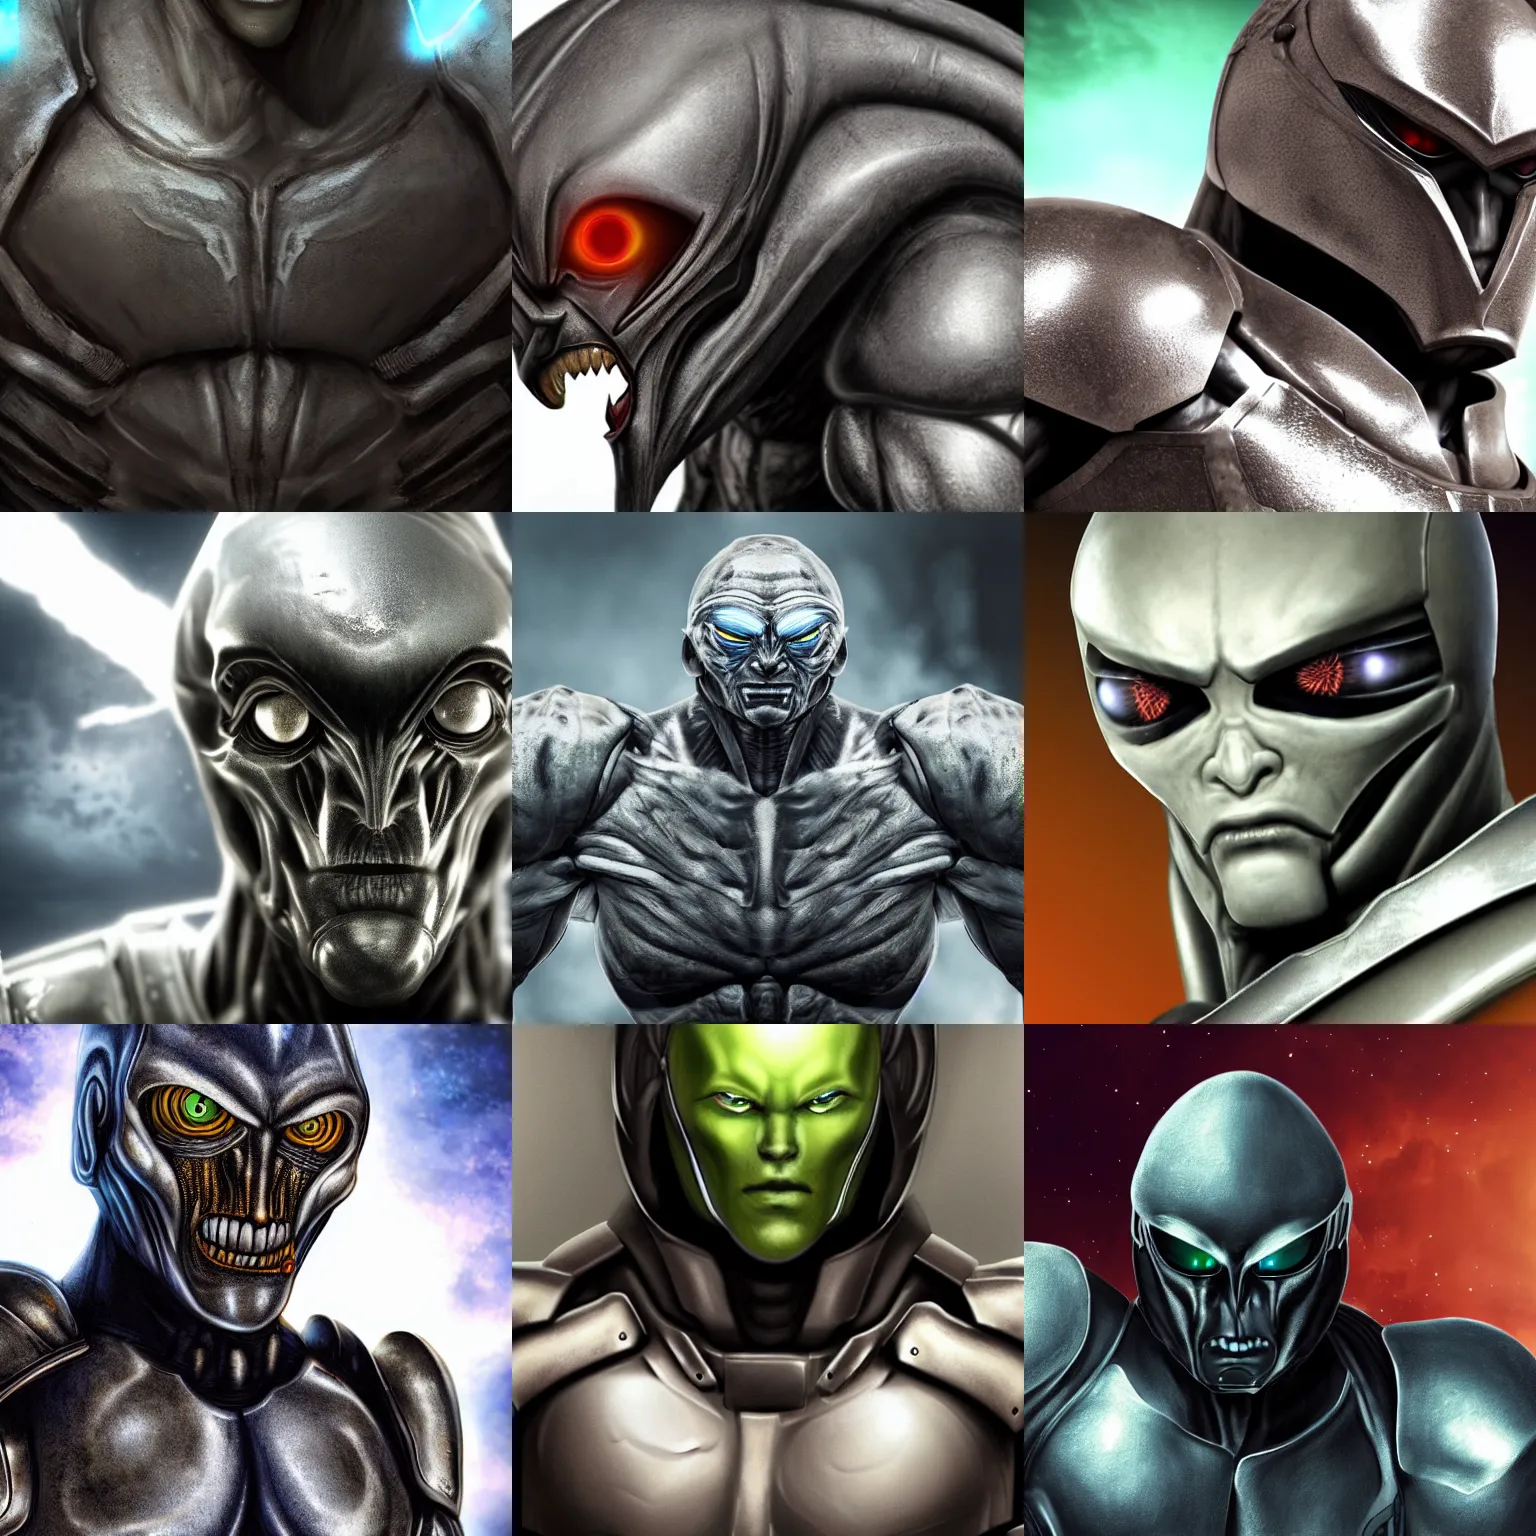 Prompt: close up realistic photo large muscular alien soldier wearing armor, he has glowing eyes portrait